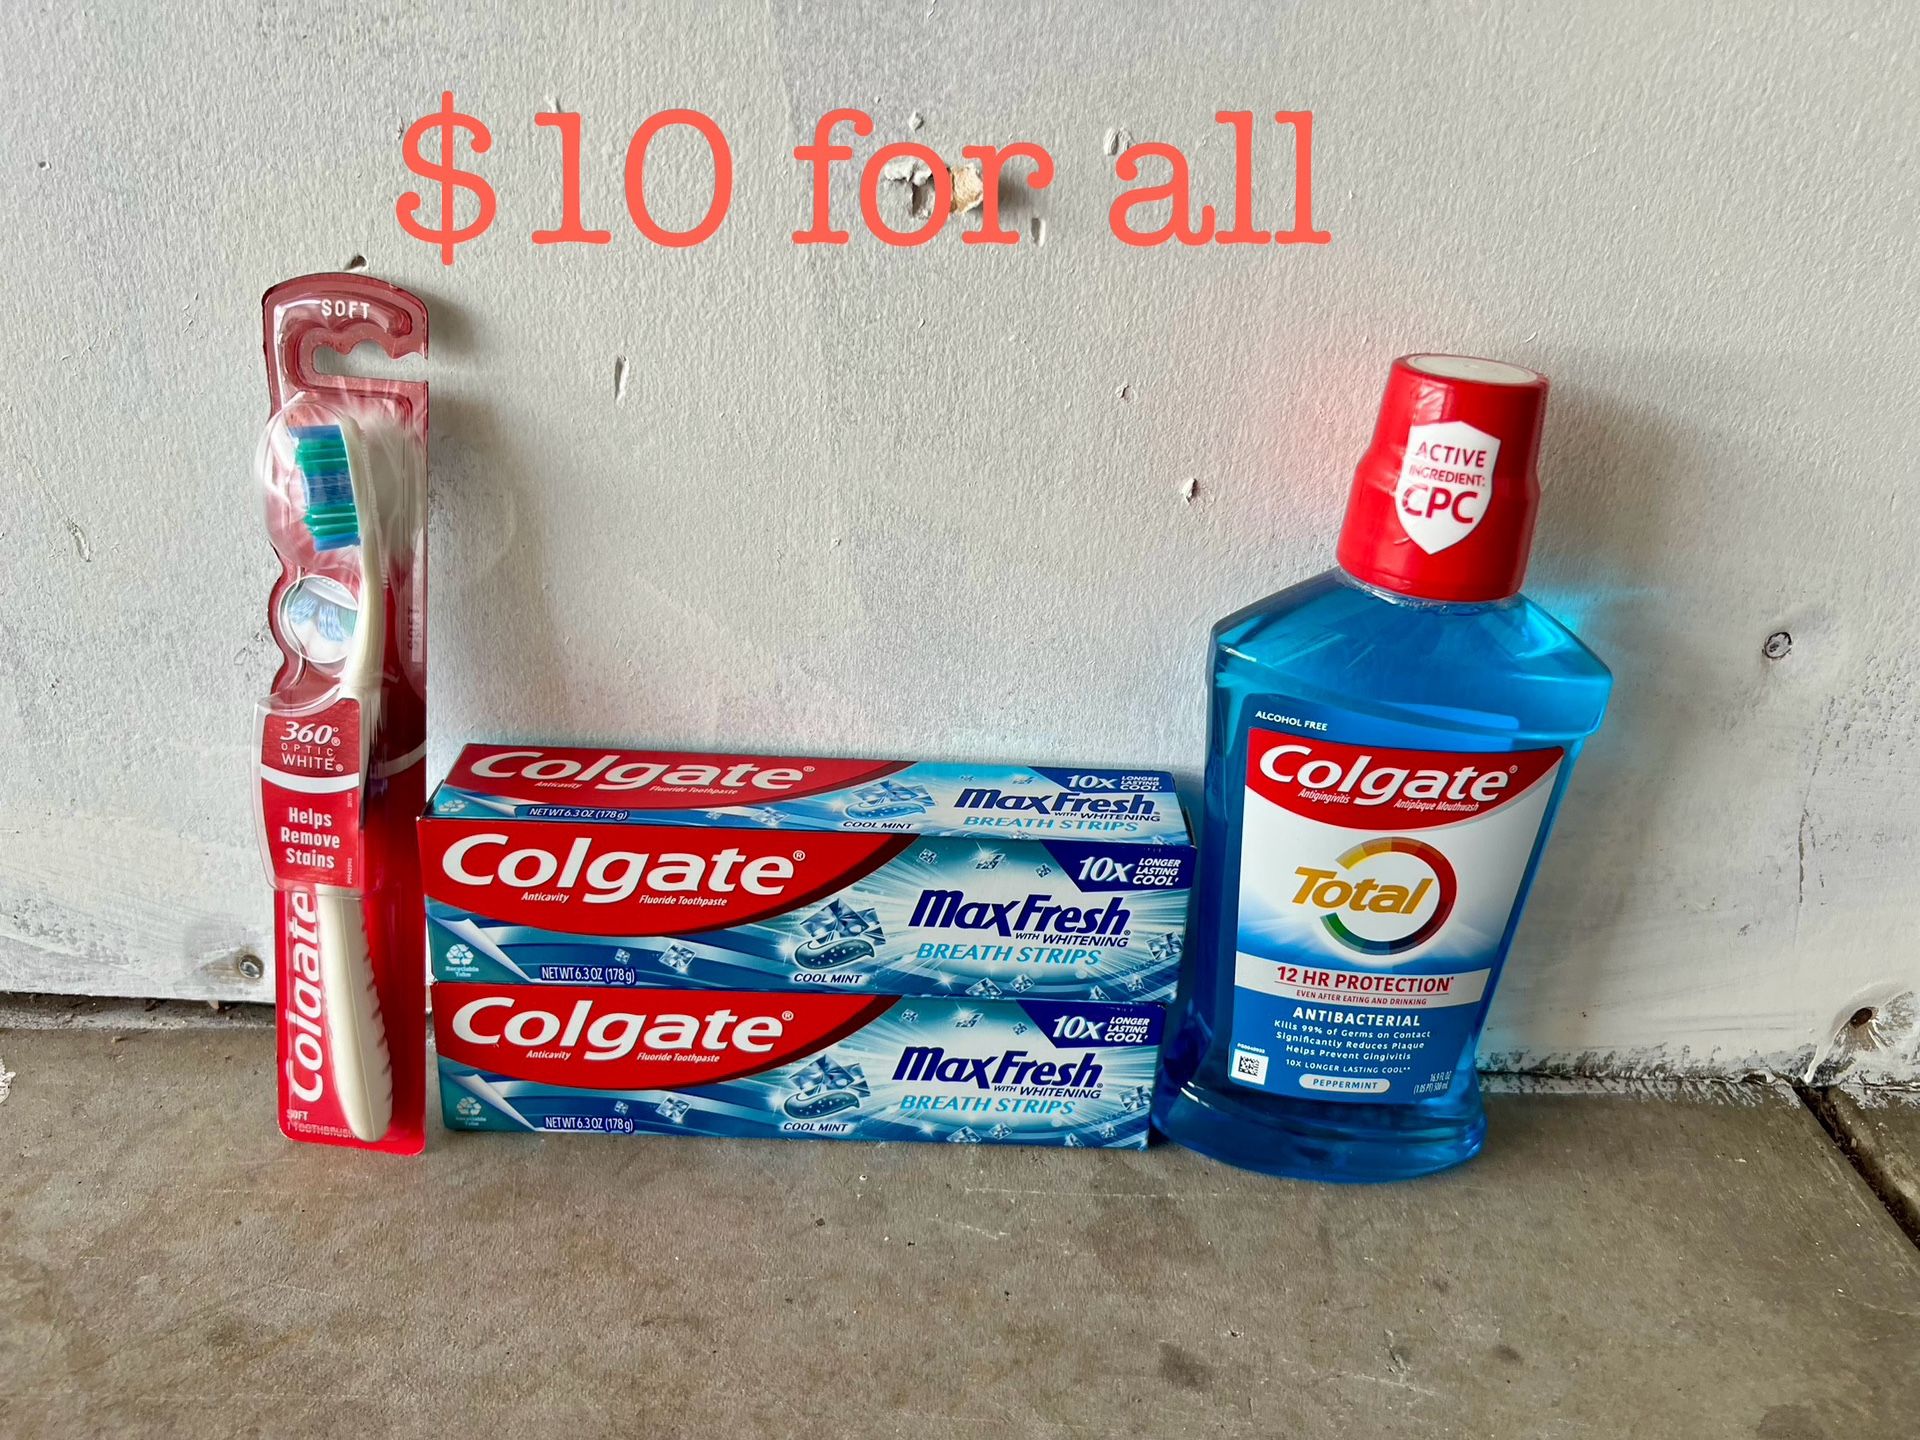 Colgate $10 For All Price Firm 